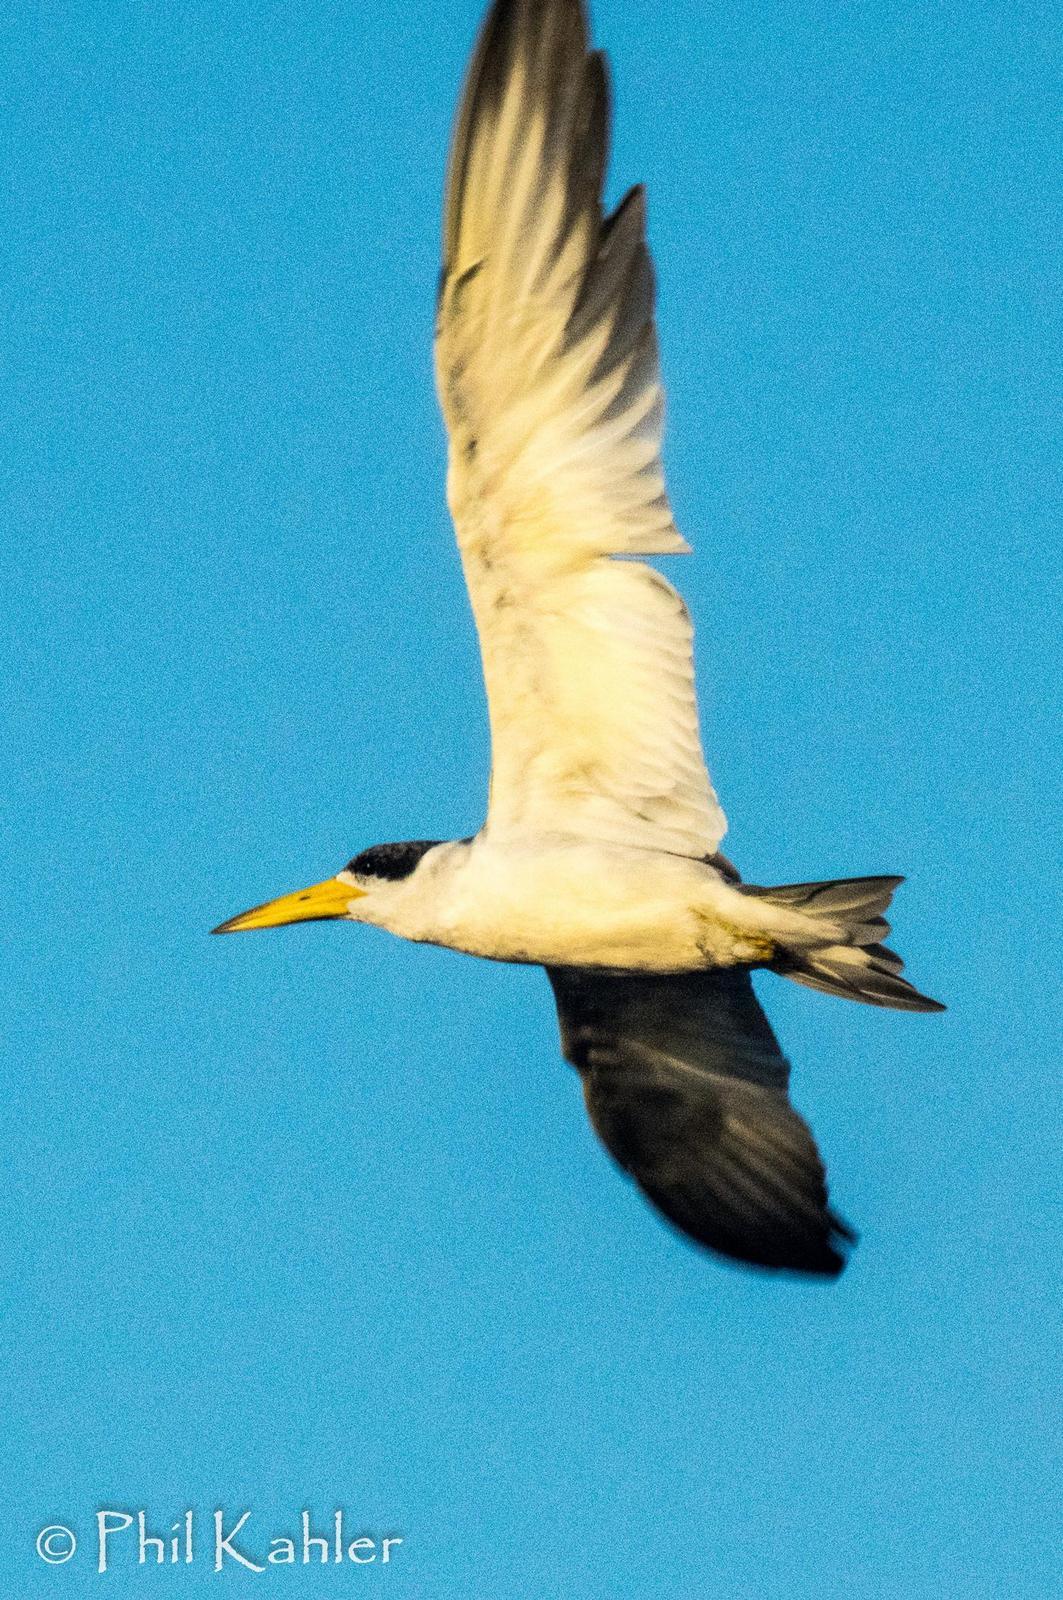 Large-billed Tern Photo by Phil Kahler